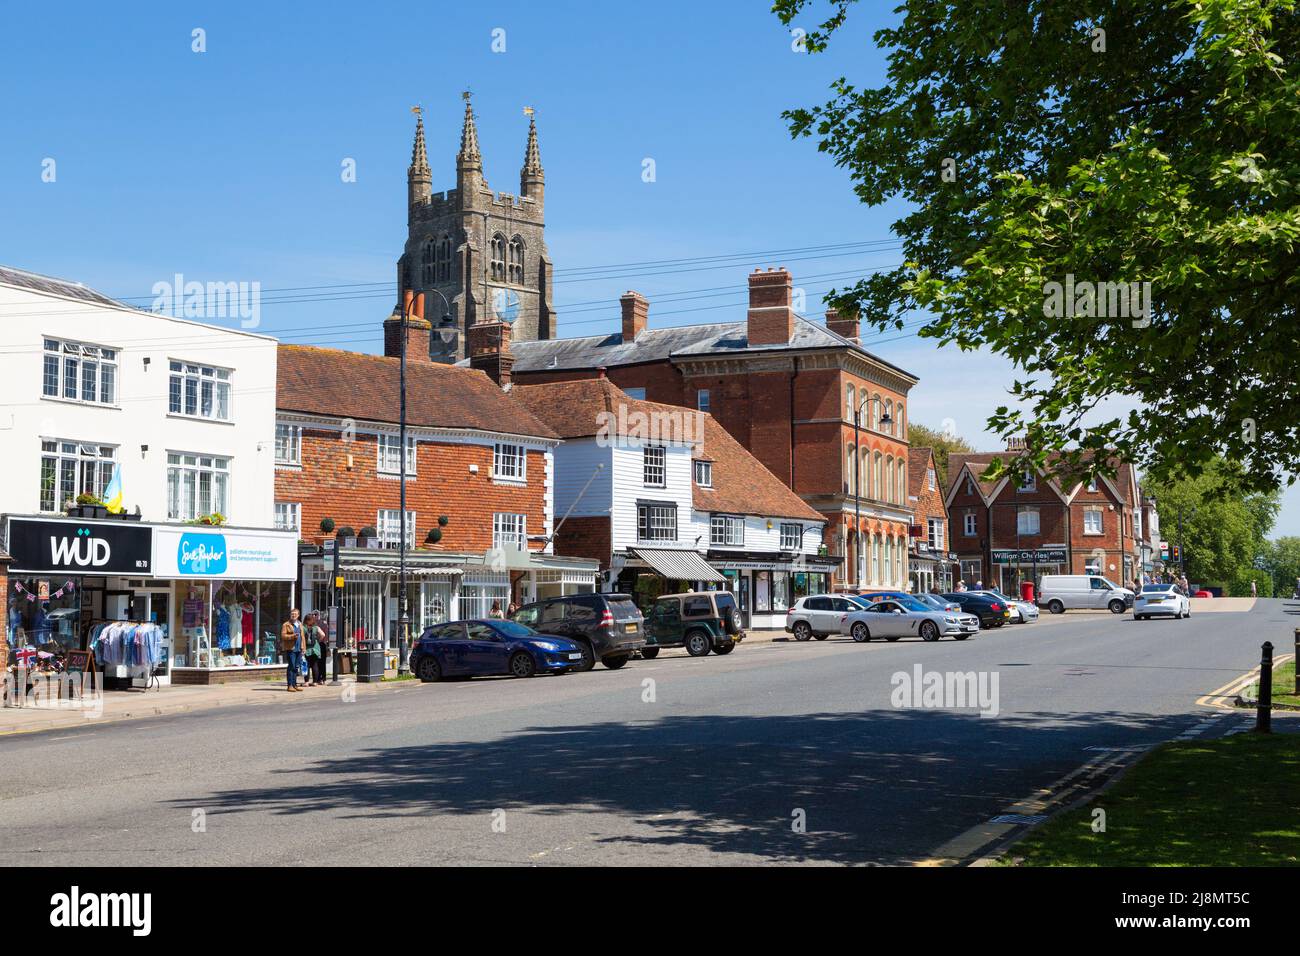 Tenterden high street, The Jewel of the Weald, bright and sunny may day, kent, uk Stock Photo